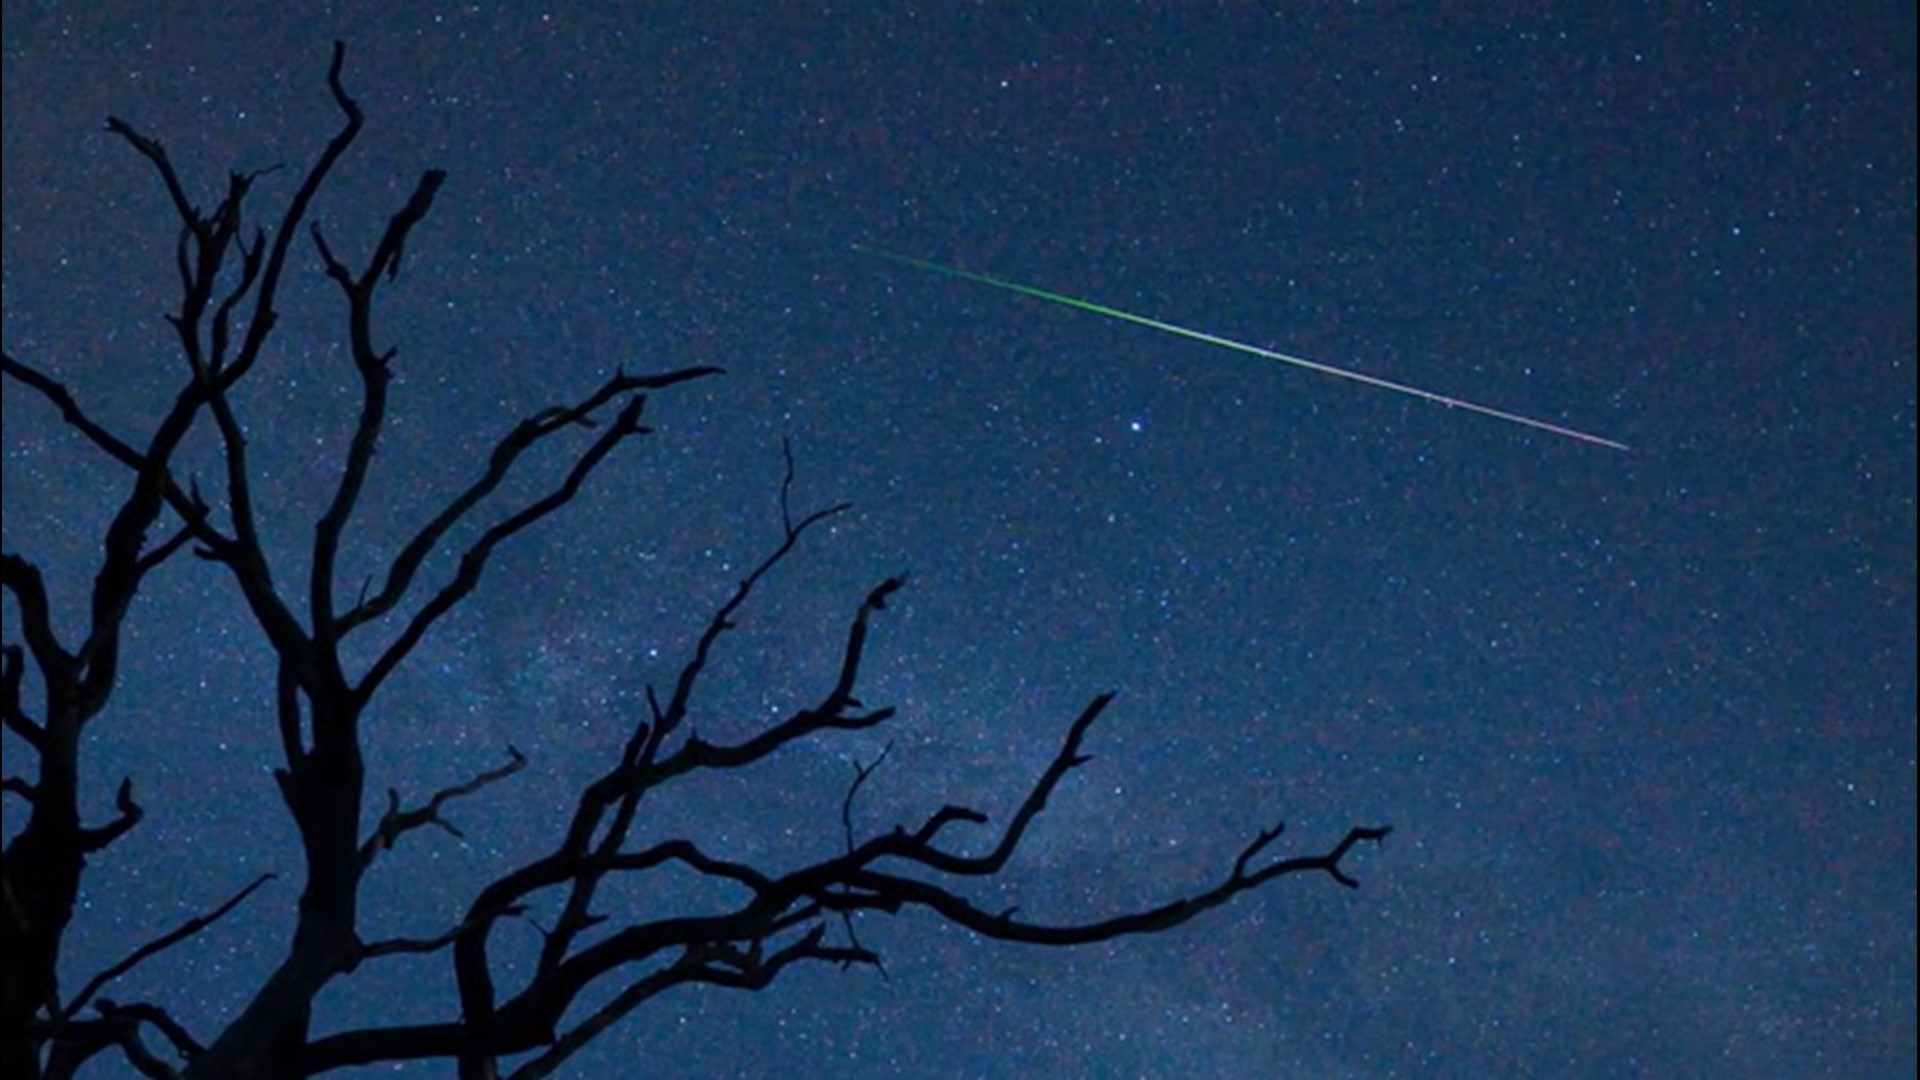 May kicks off with shooting stars on May 4-5. A nearly full moon may interfere with the Eta Aquarid meteor shower, but you can still see meteors.